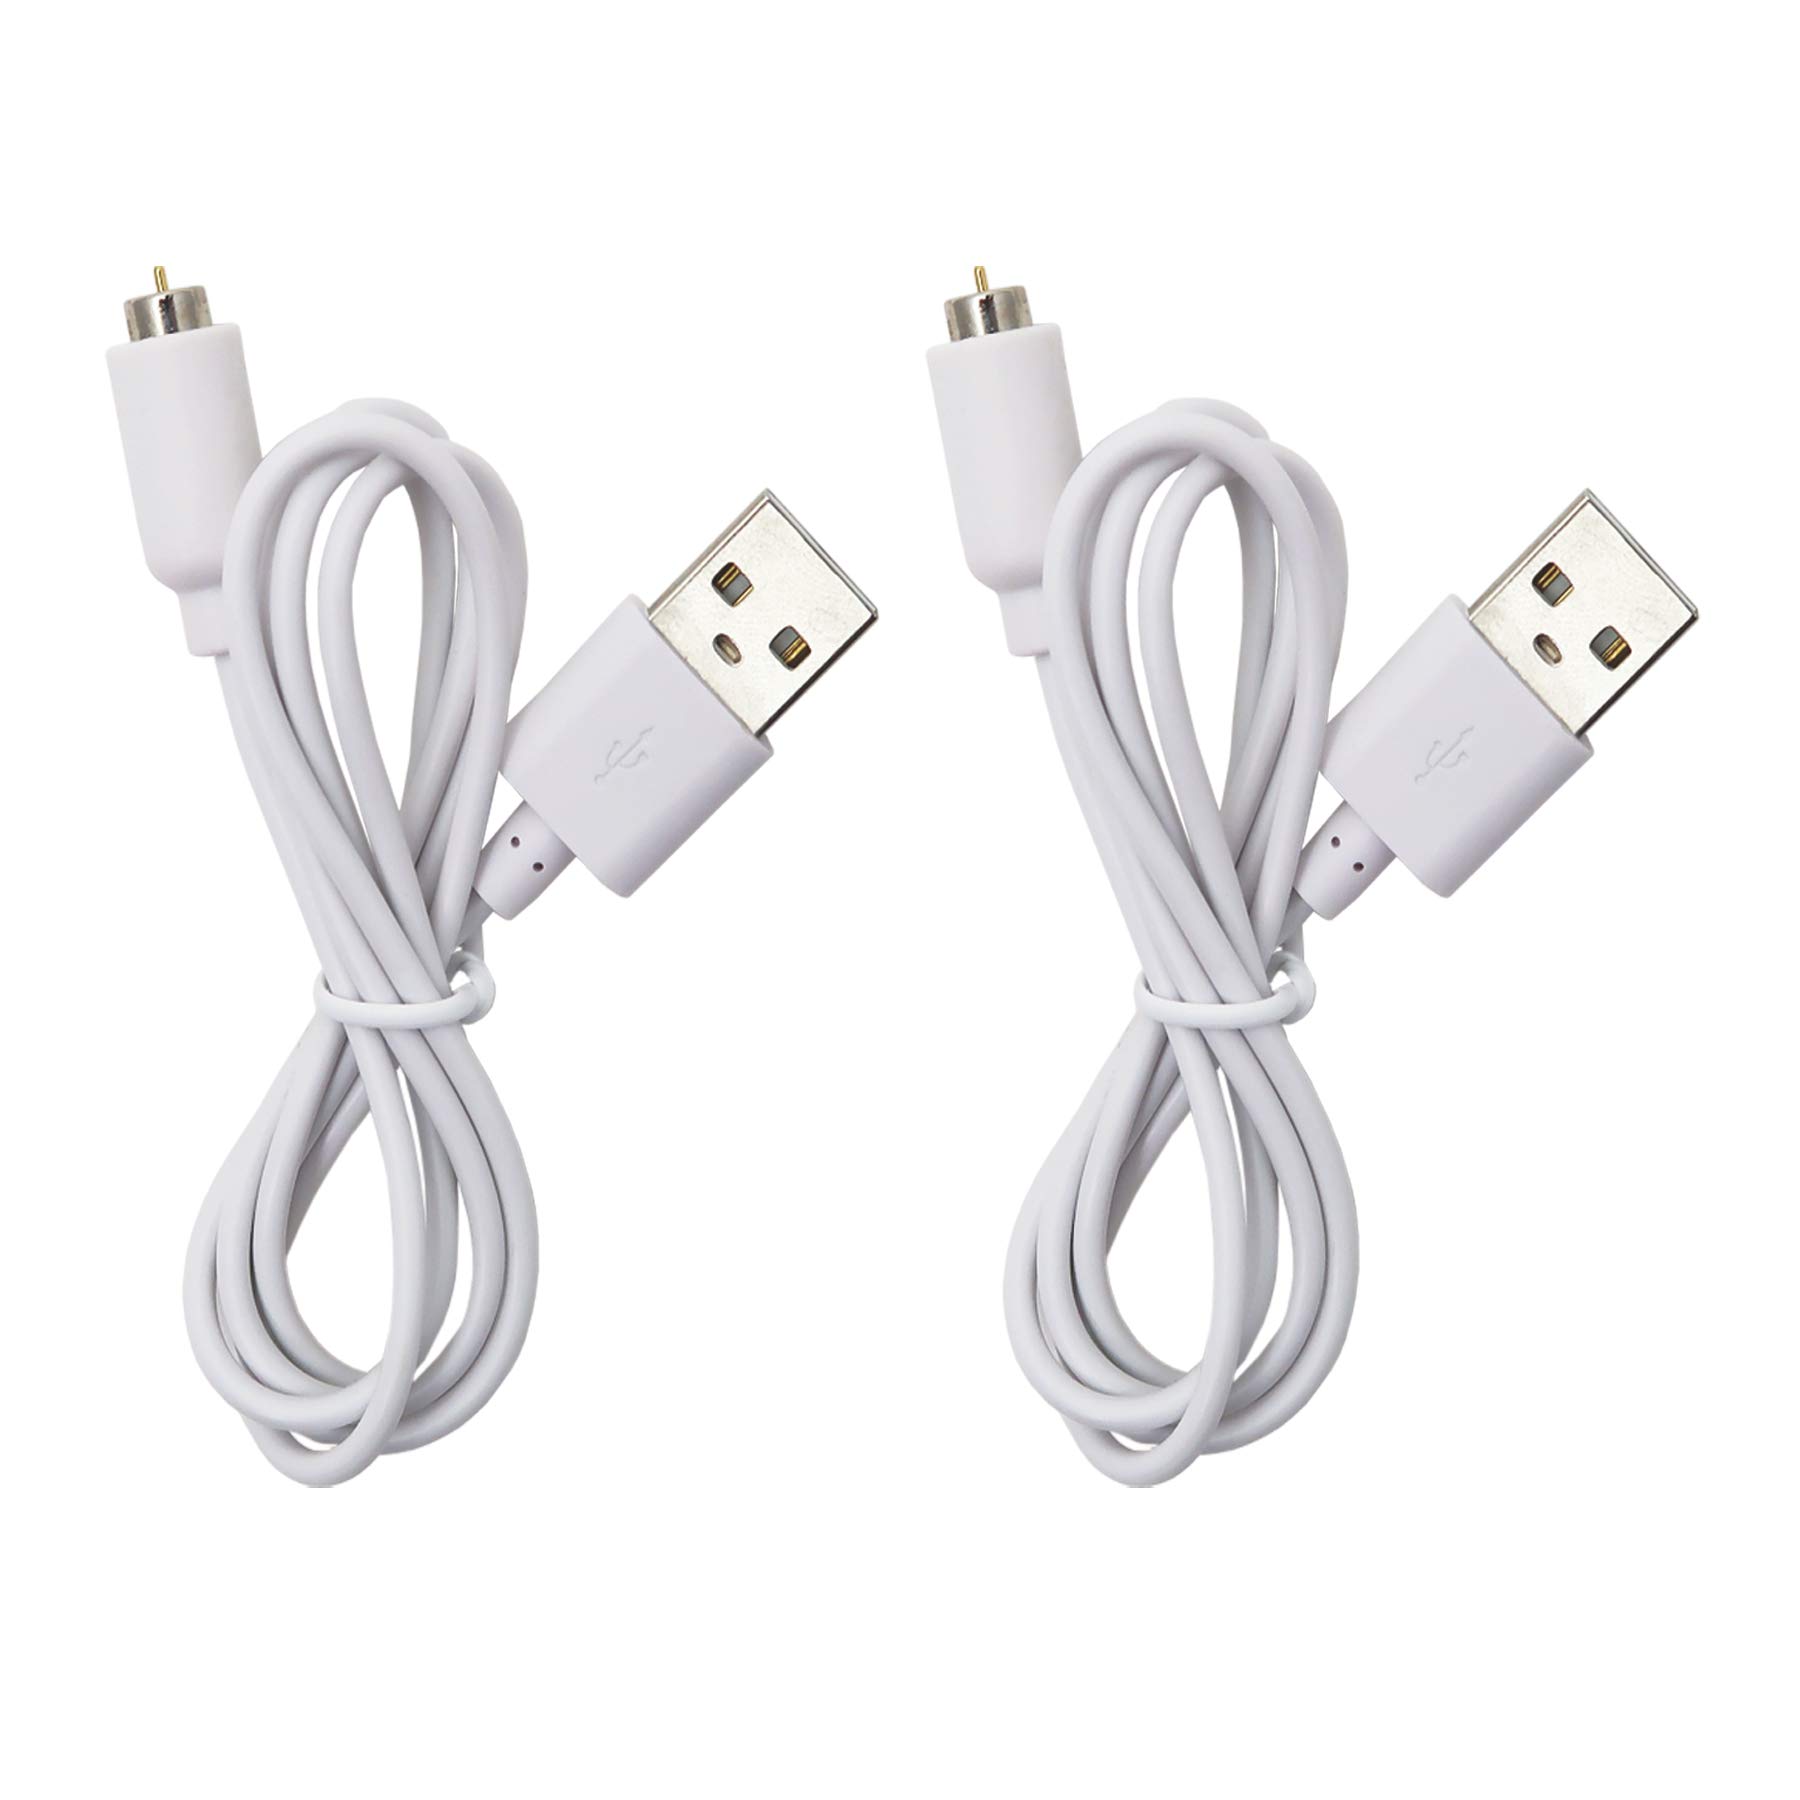 PlusOne Replacement Magnetic Charging Cables, 2Count